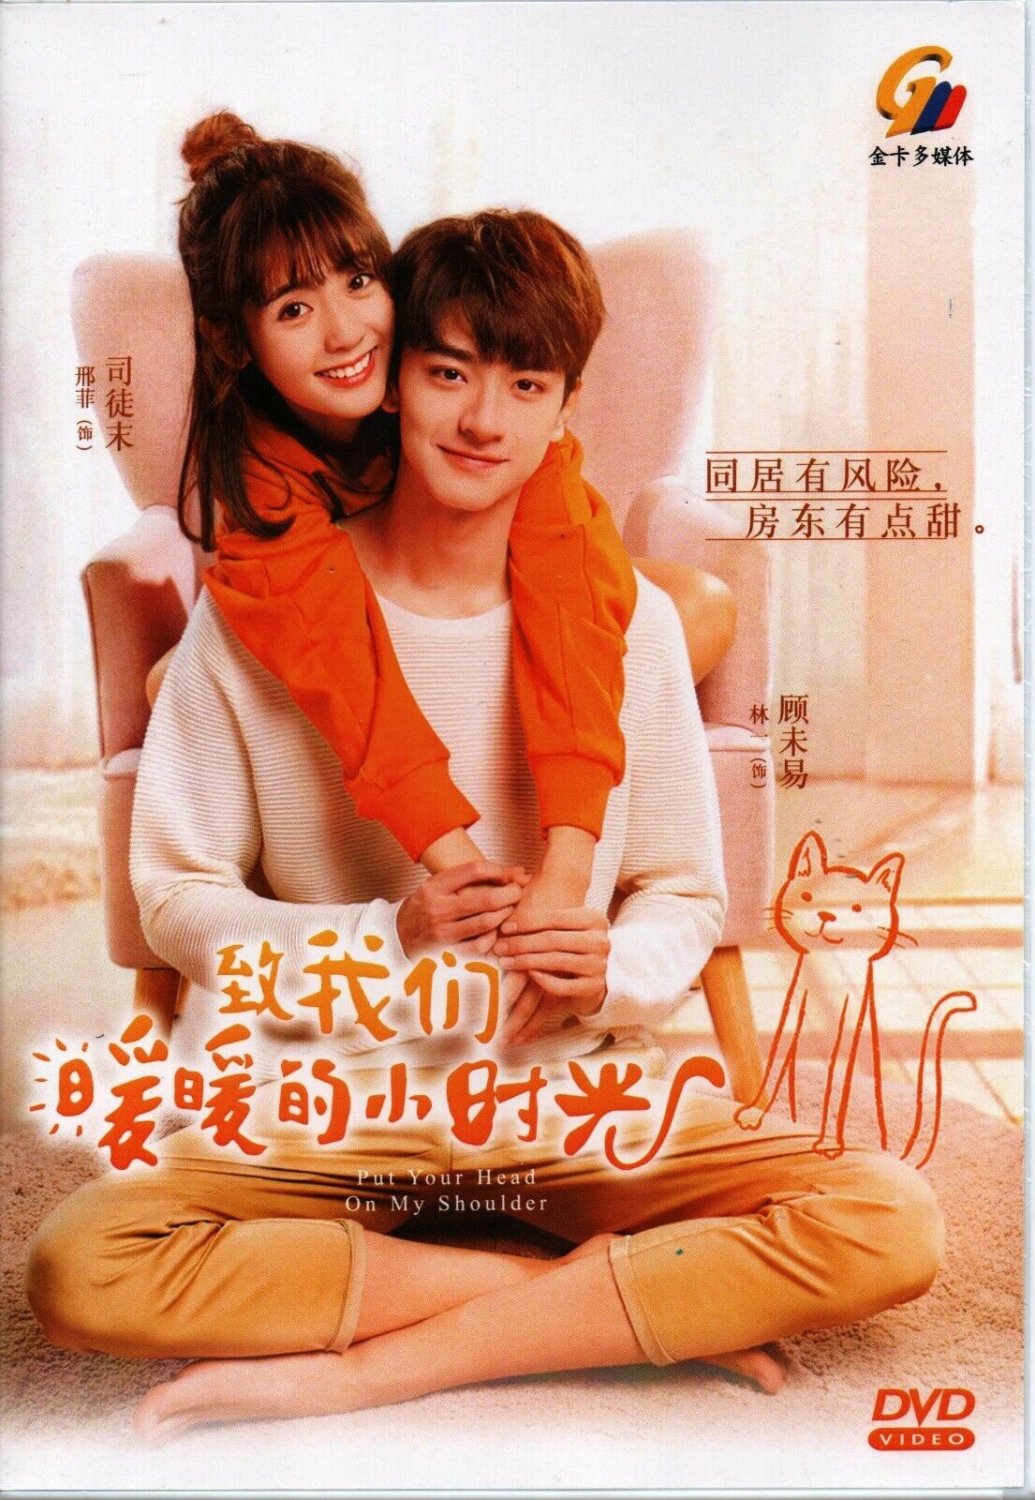 Put Your Head On My Shoulder (2019) Chinese Drama DVD with English Subtitle